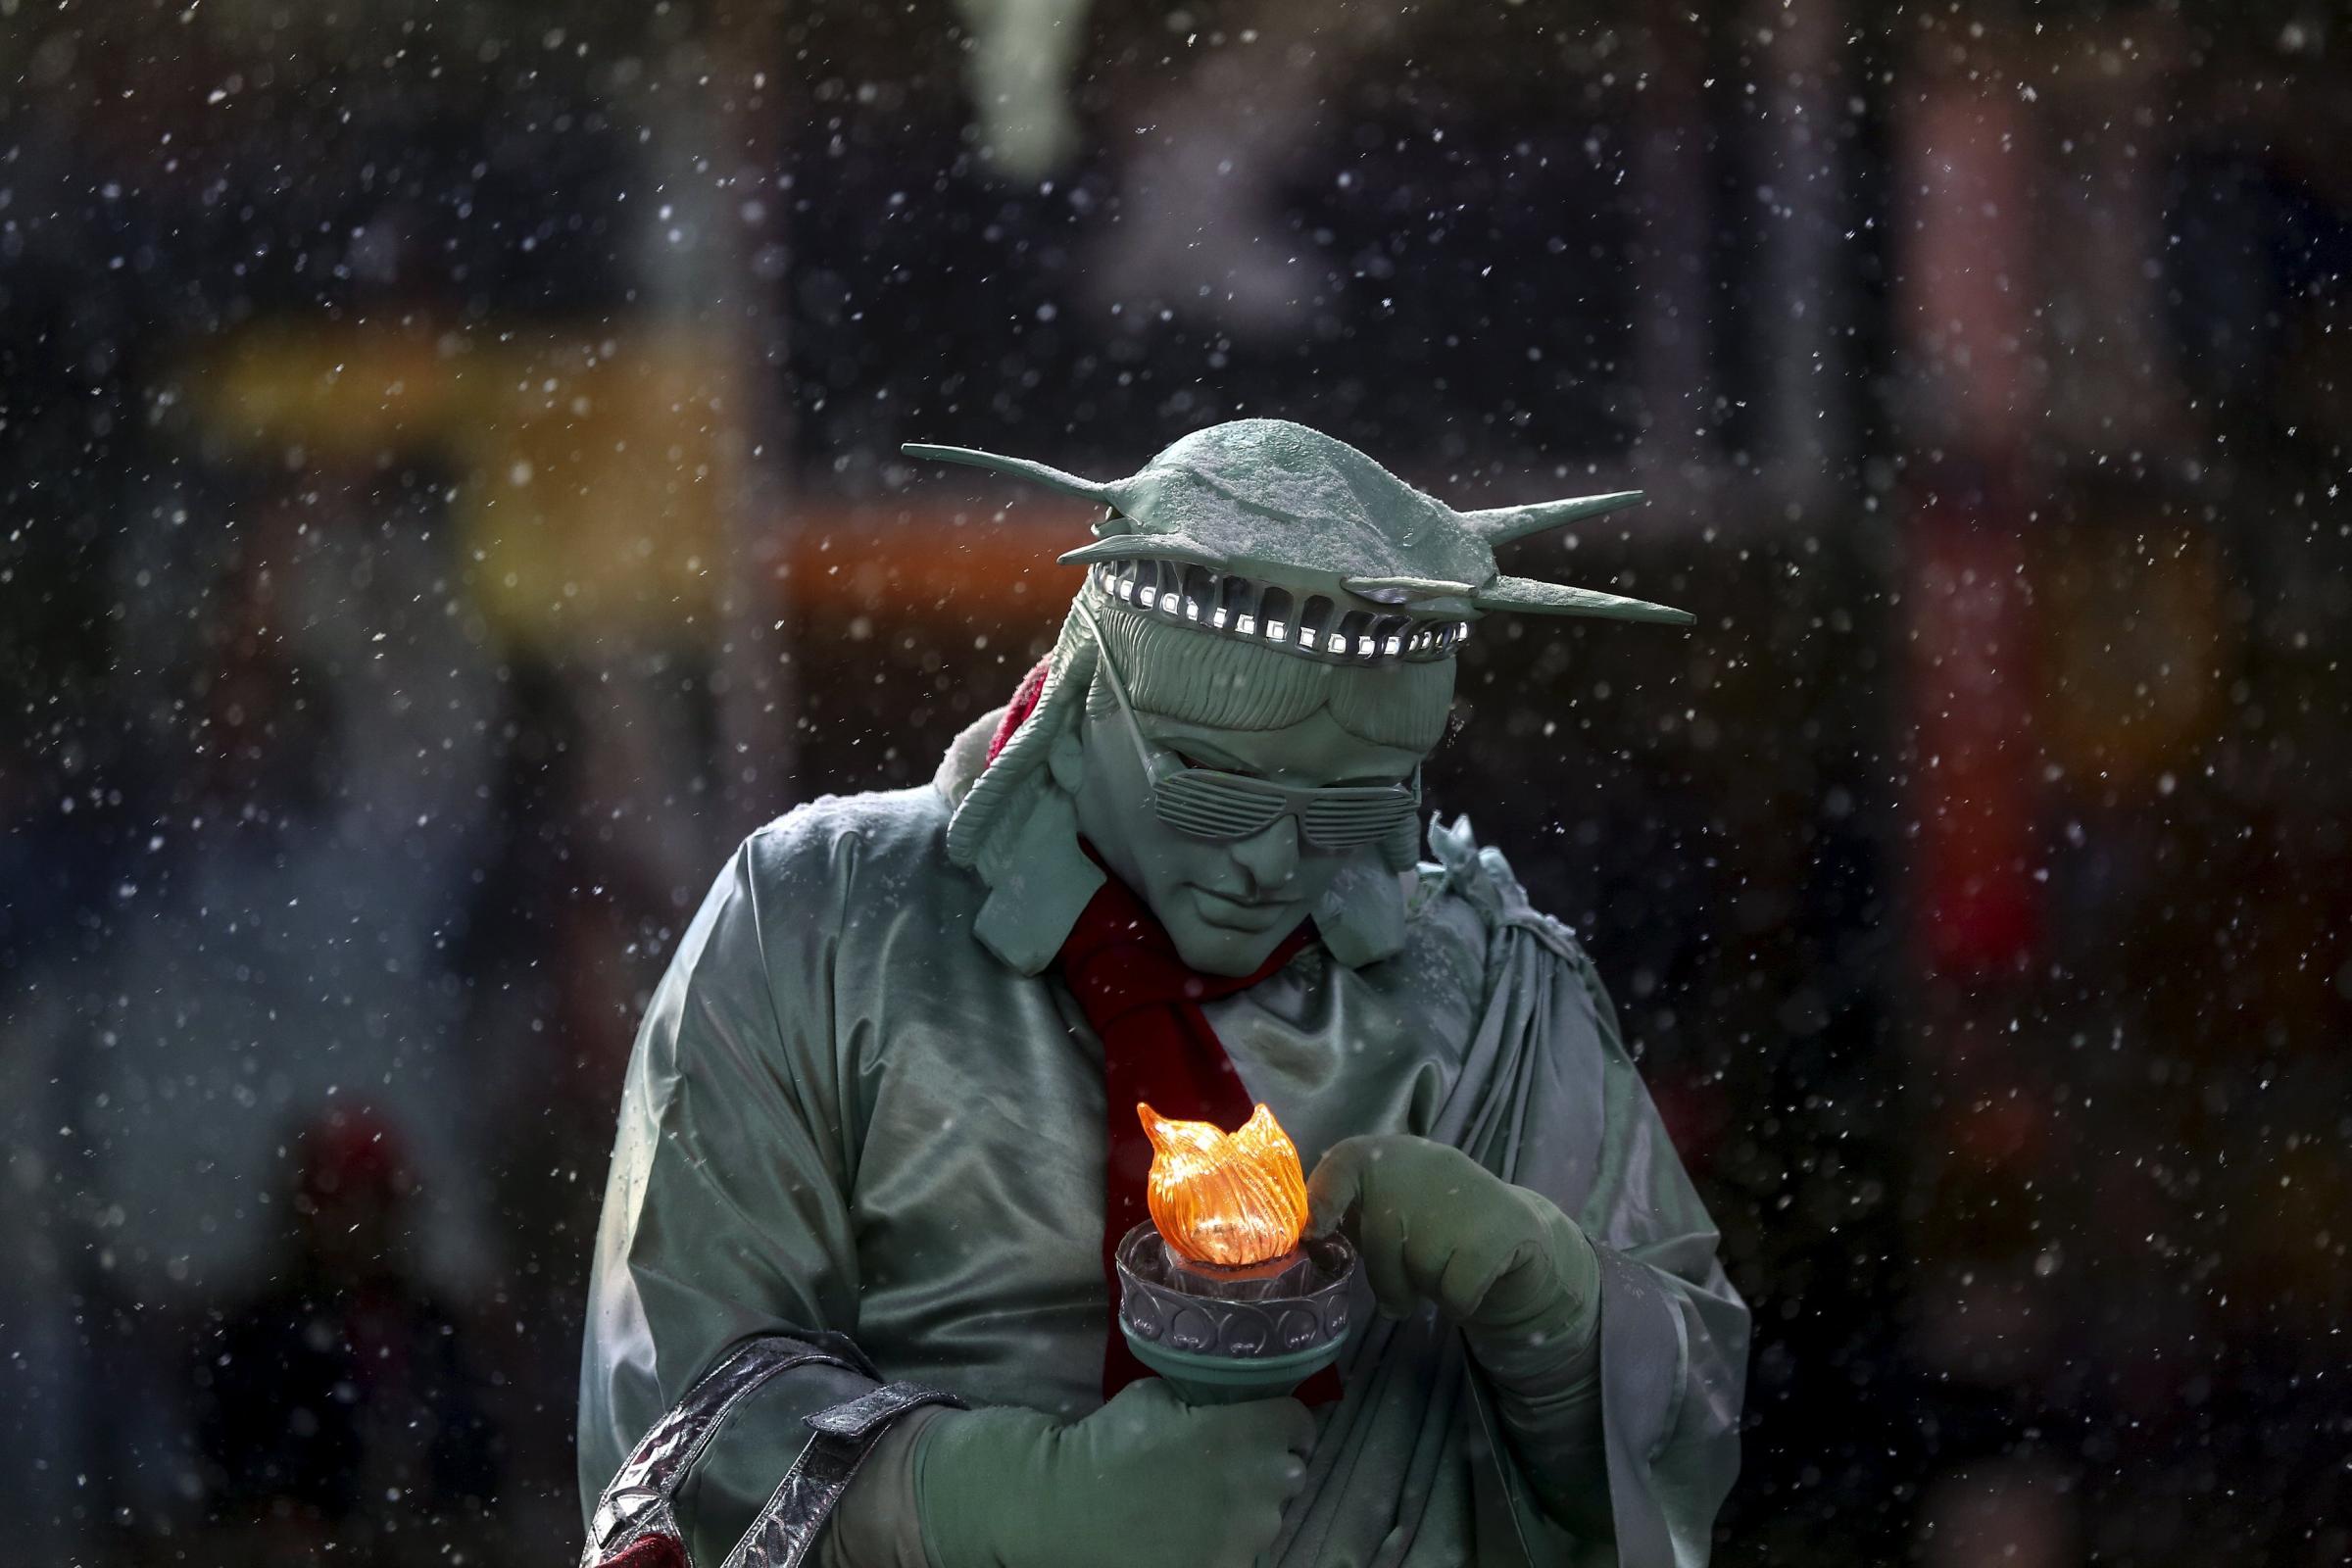 A man dressed as the "Statue of Liberty" tries to fix his light as it begins to snow in Times Square in the Manhattan borough of New York